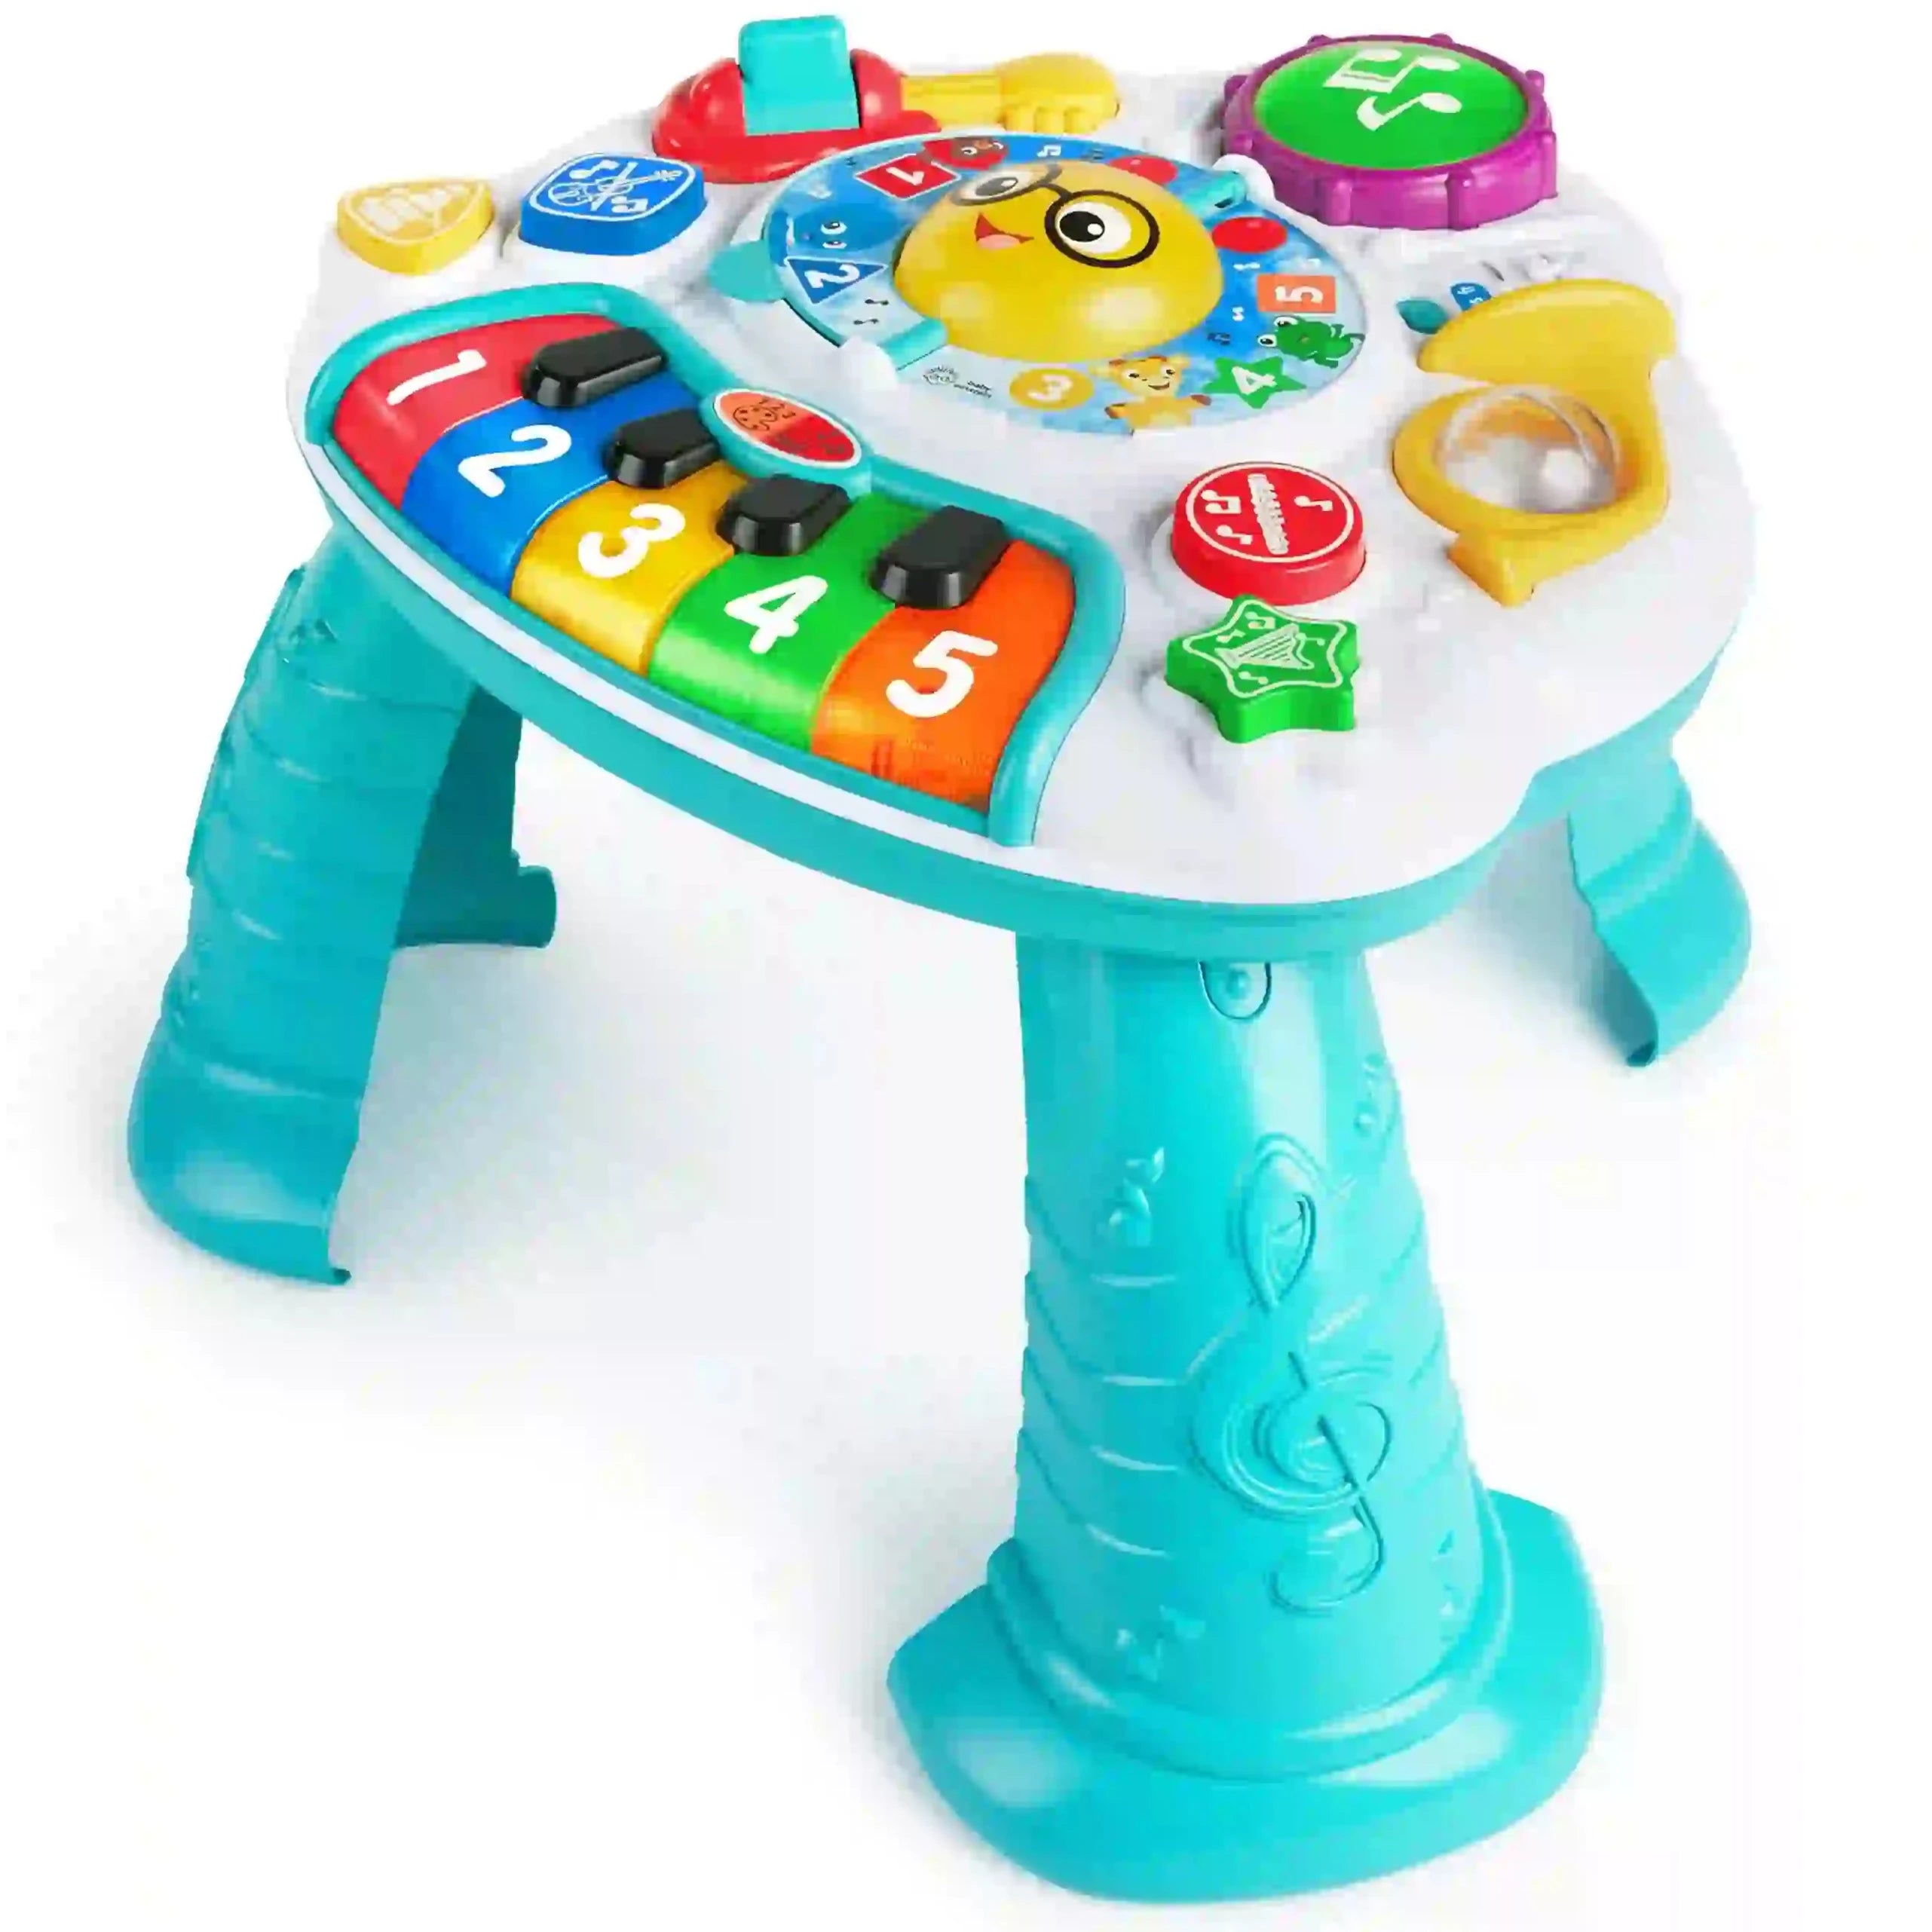 Discovering Music Activity Table